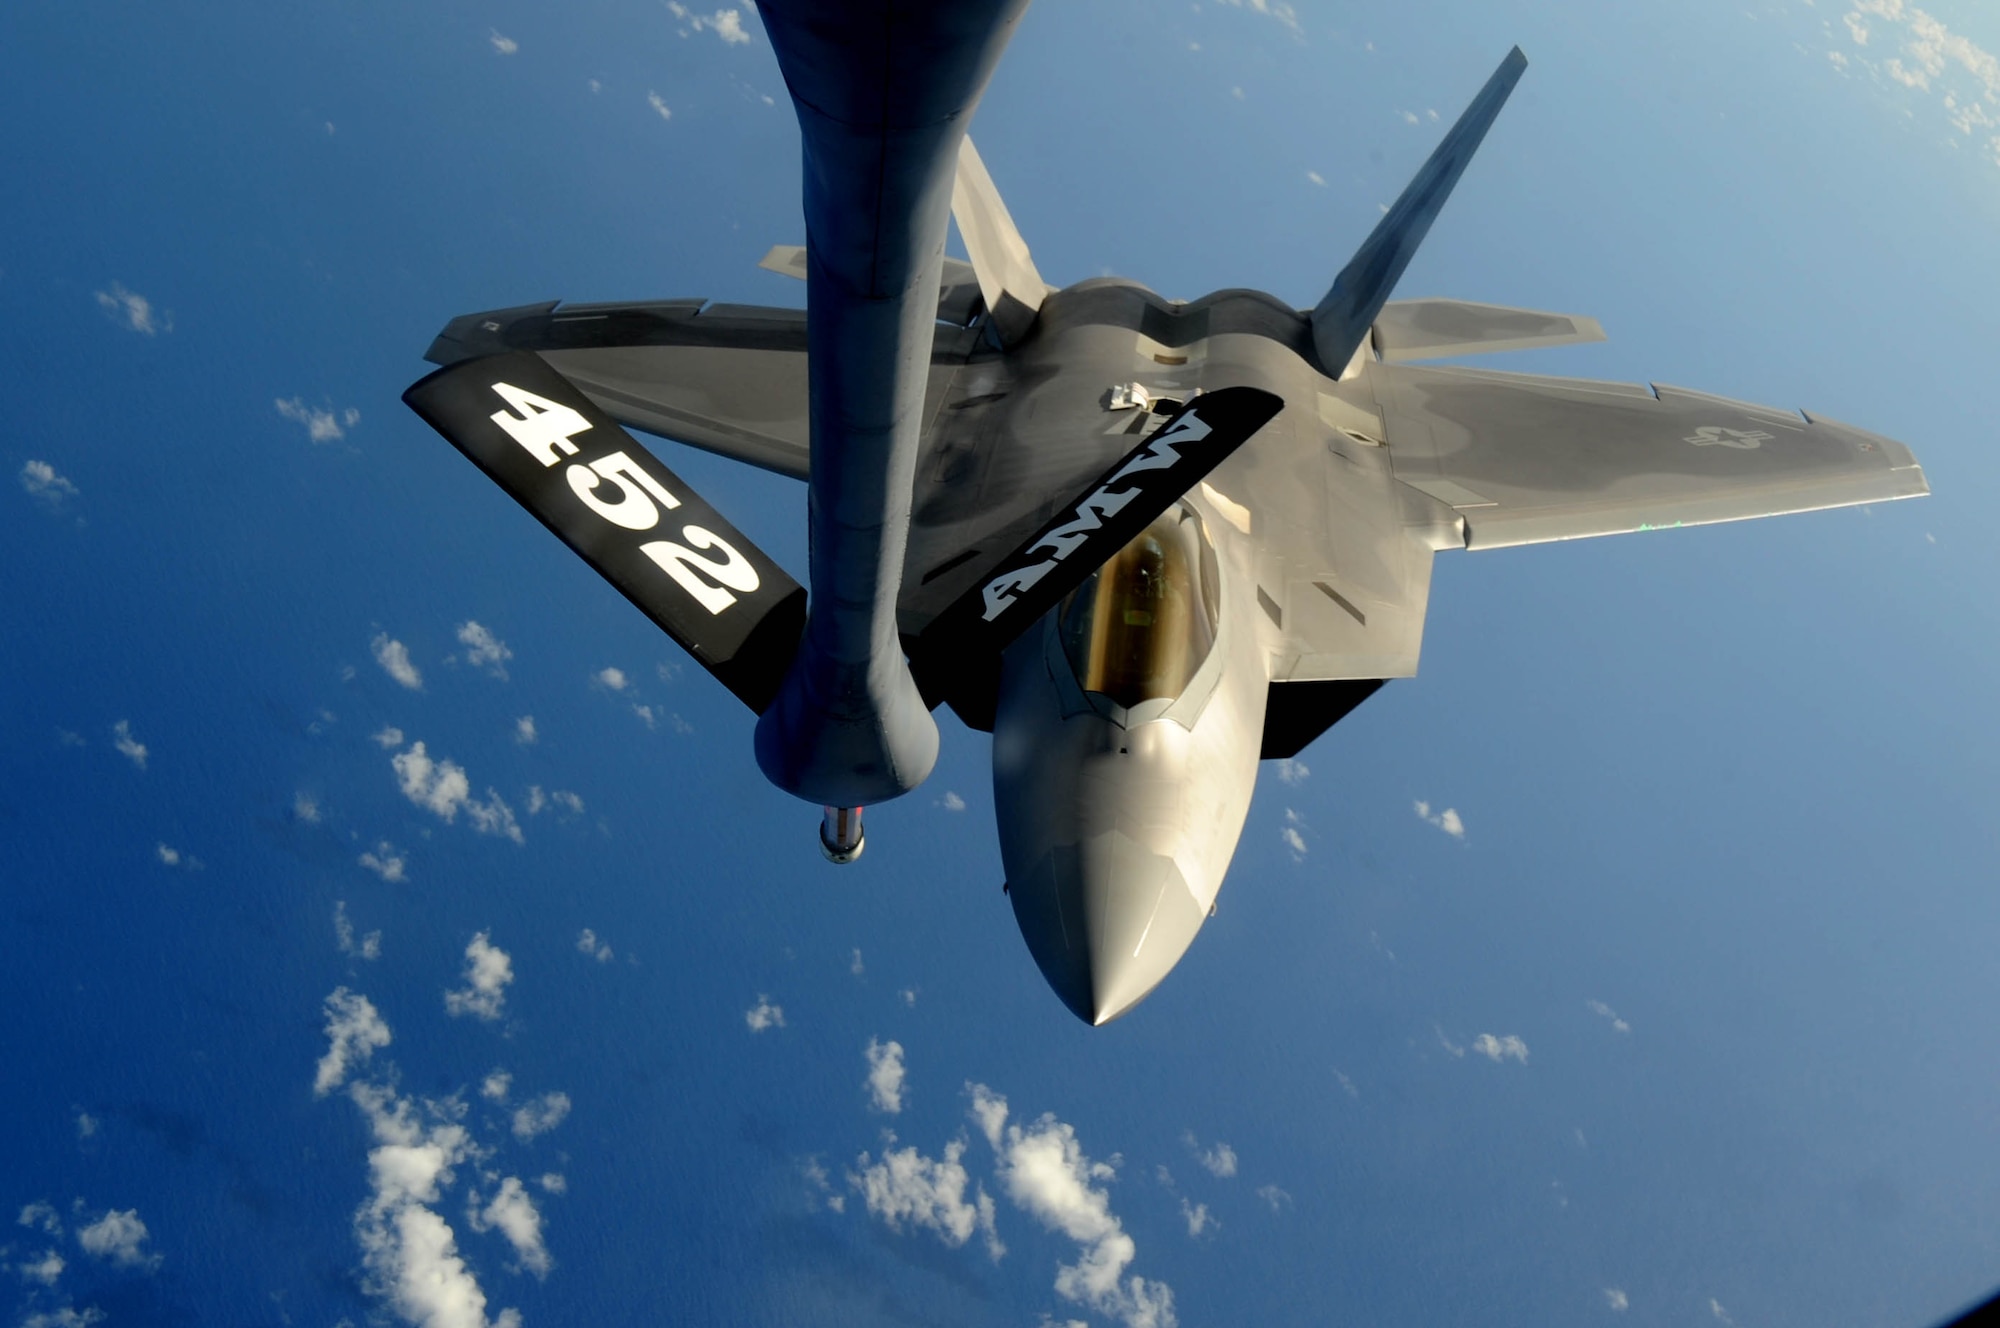 A F-22 Raptor approaches the boom of a KC-135 Stratotanker to refuel over
the Pacific Ocean Aug. 13.  KC-135 Stratotankers, F-22 Raptors and B-52
Stratofortress bombers took part in the 2009 Inaugural Turkey Shoot, which
allows air expeditionary units to plan and execute tactical missions with
airframes that don't regularly train together. The F-22s are deployed from
Elmendorf Air Force Base, Alaska, to Andersen AFB, Guam, to support U.S.
Pacific Command's Theater Security Package in the Asia-Pacific region.
(U.S. Air Force photo/Senior Airman Christopher Bush)